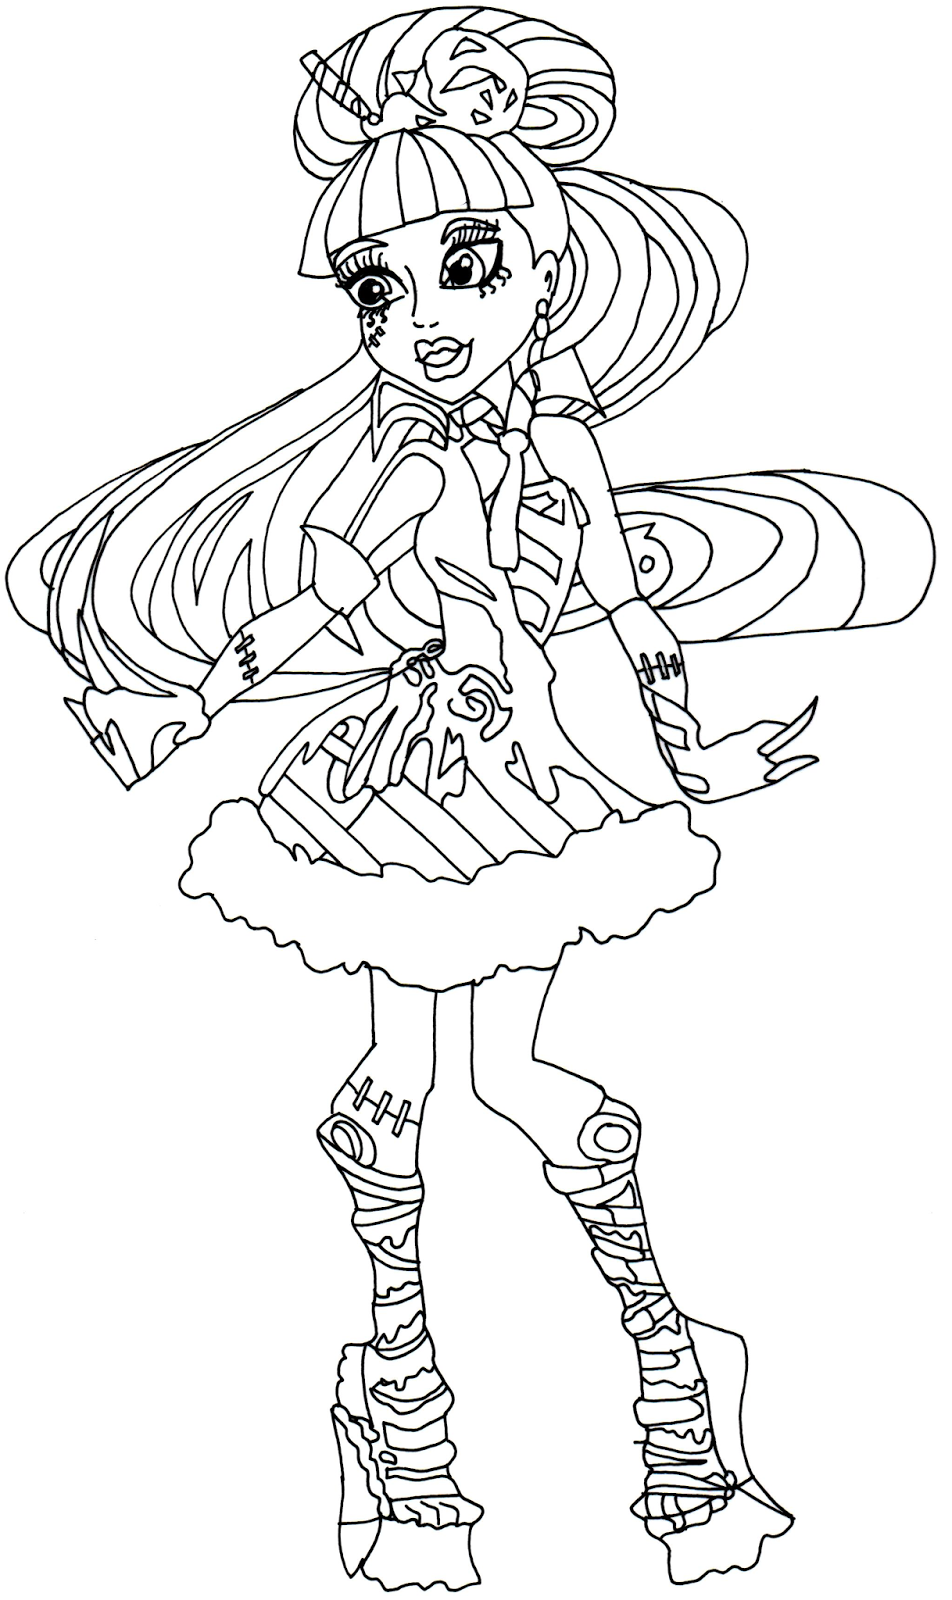 Sweet 1600 coloring pages